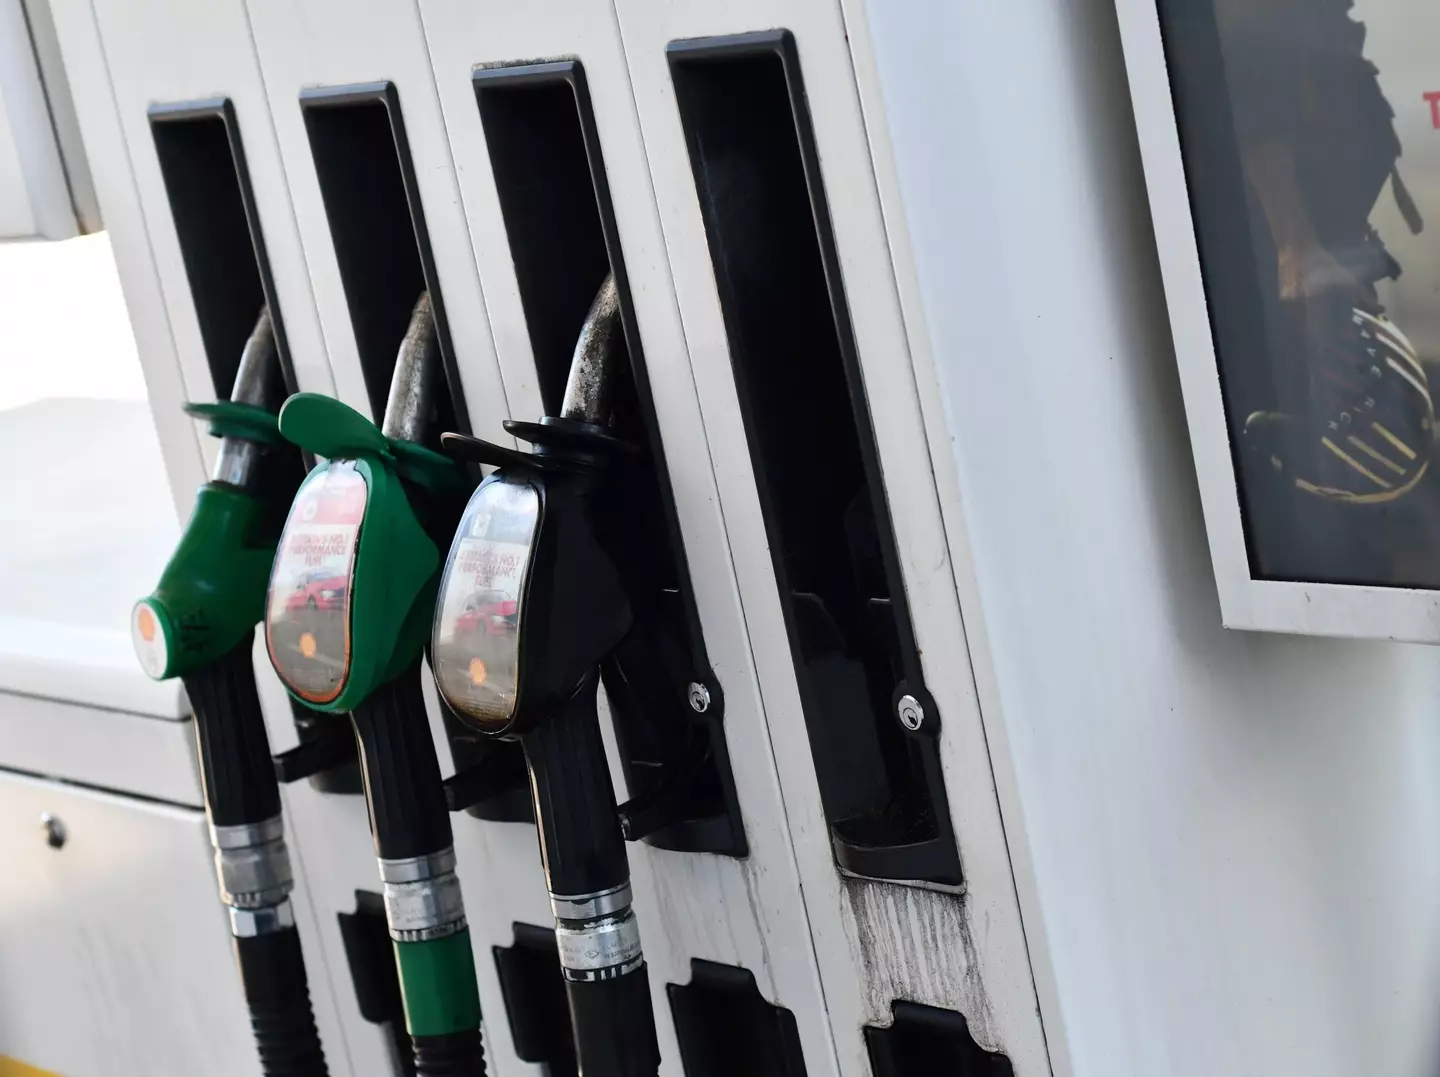 Gas prices are expected to soar (